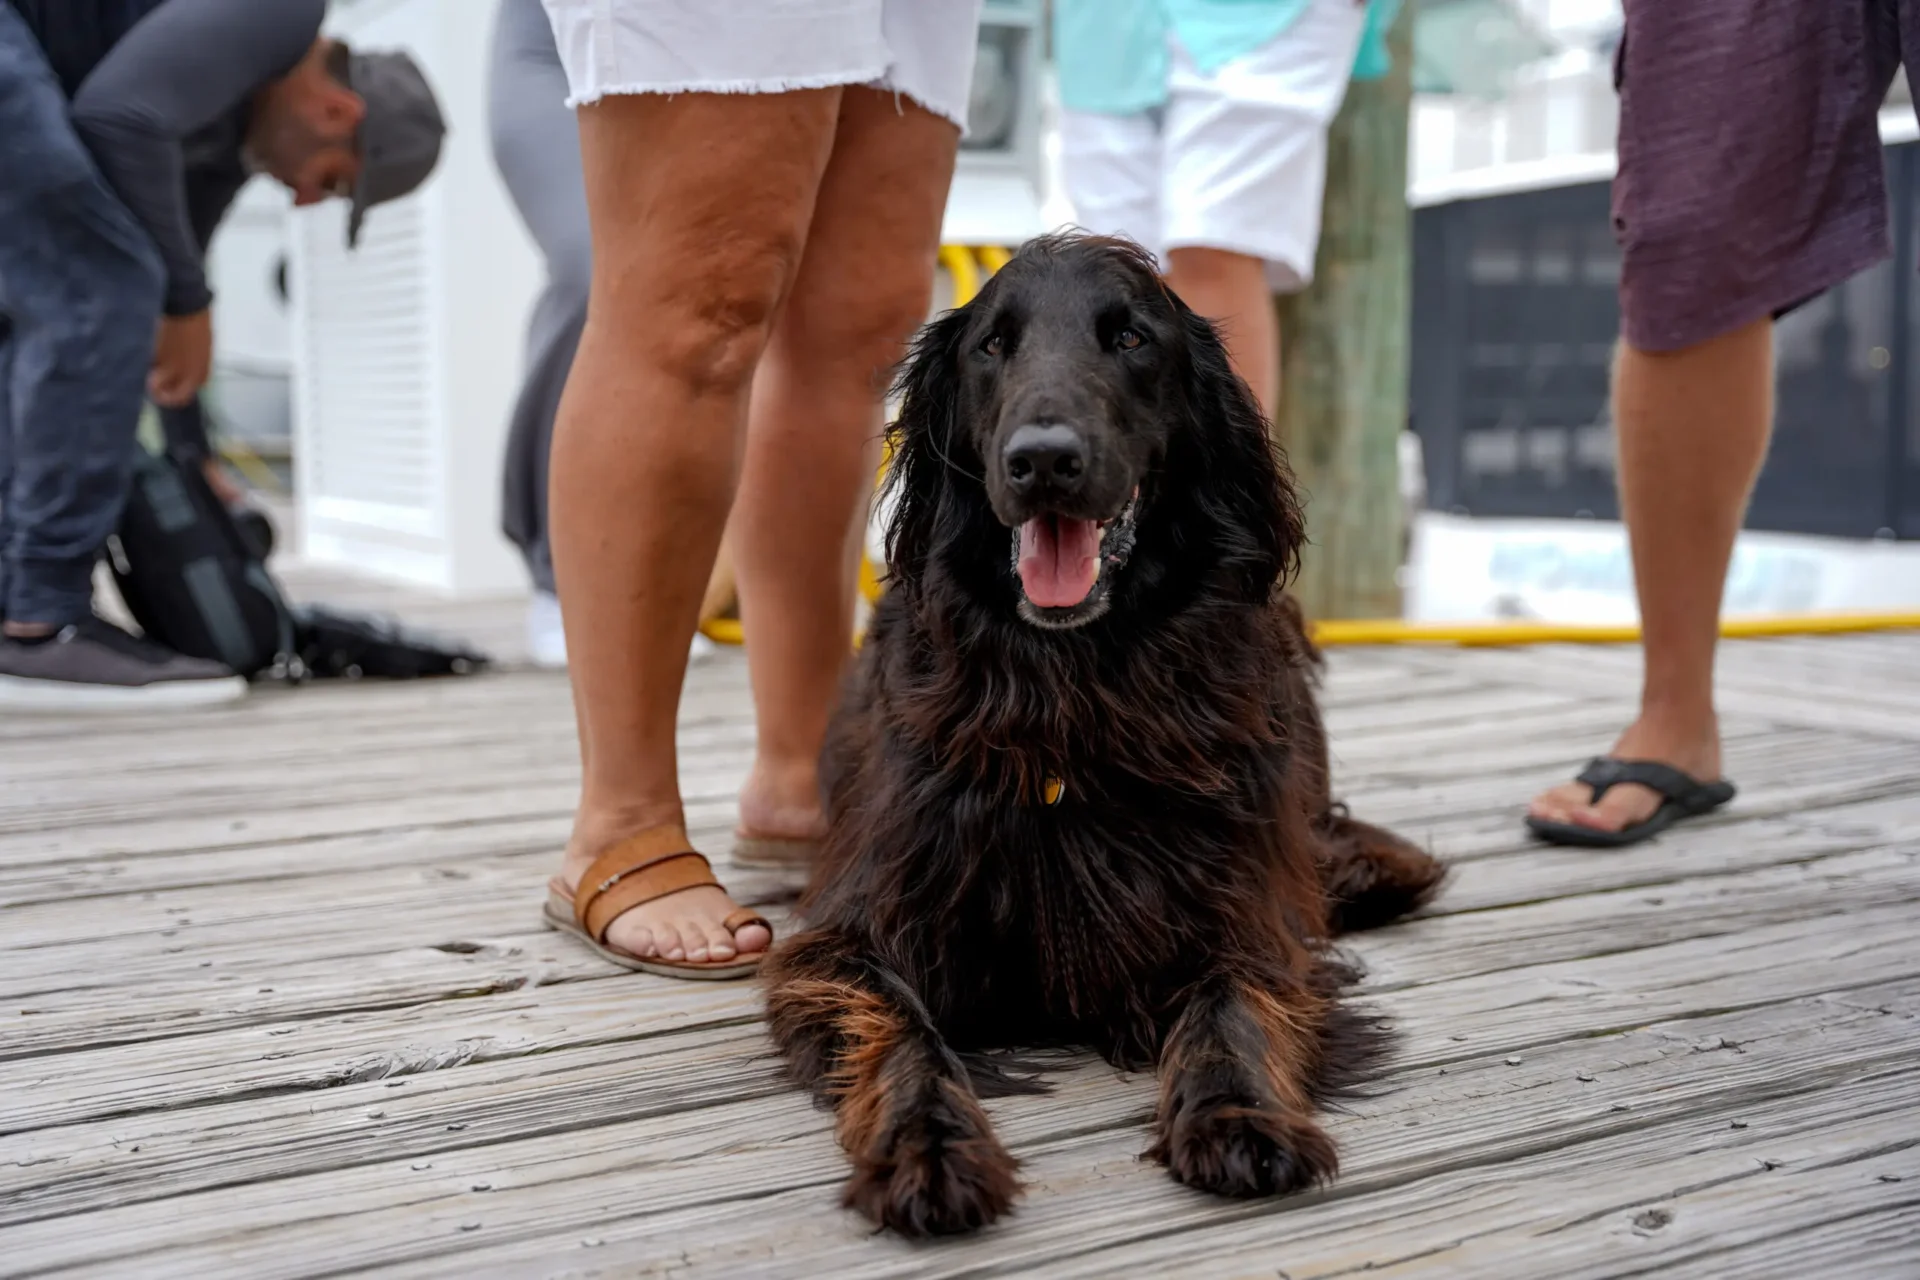 A black dog of the rendezvous sitting on a wooden deck surrounded by people's legs.